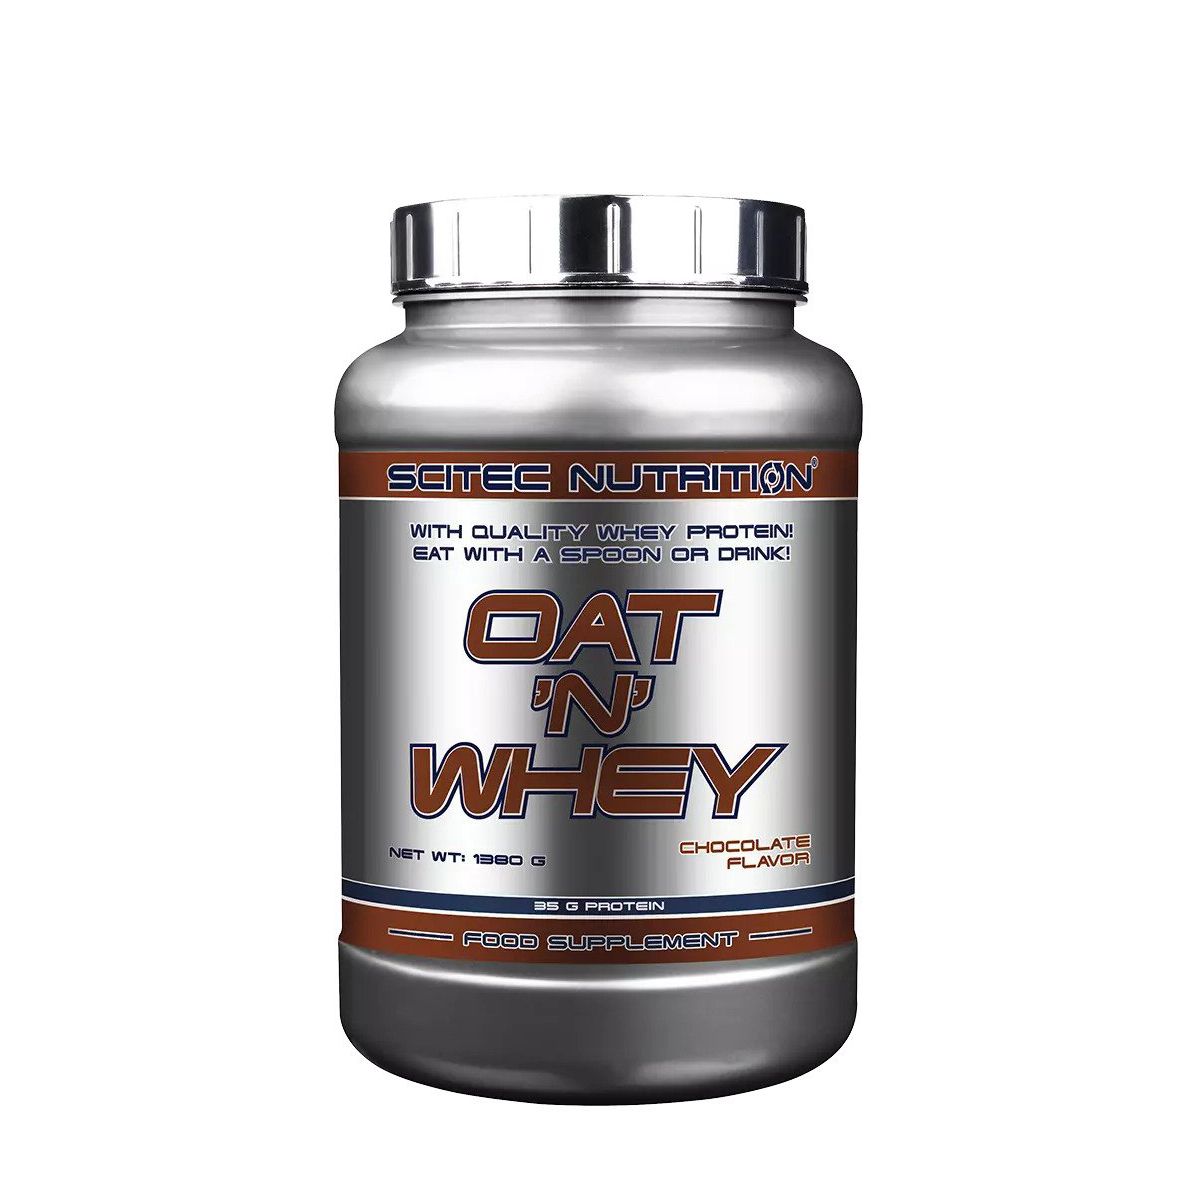 SCITEC NUTRITION - OAT 'N' WHEY - 1380 G